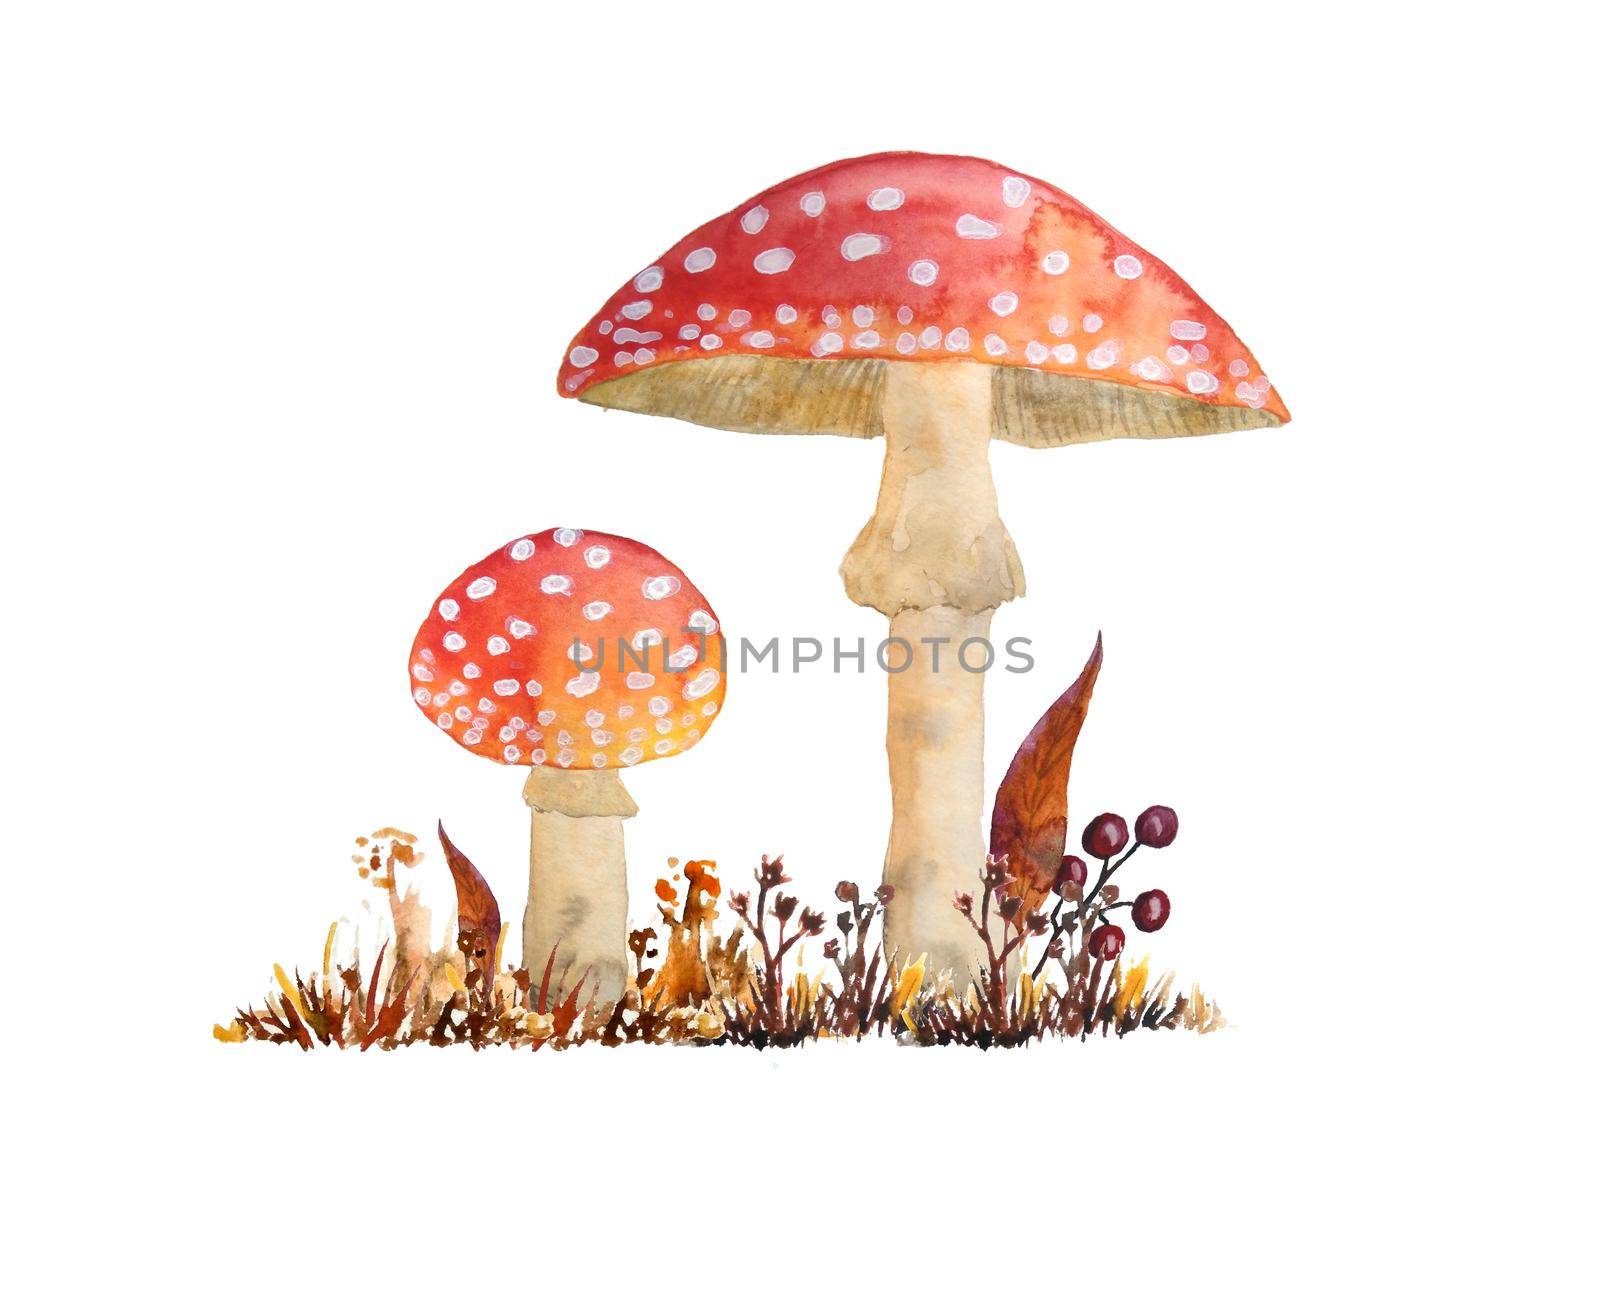 hand drawn watercolor dangerous scary poisonous mushrooms red Amanita muscaria. Wild fungus fungi from autumn fall forest woodland in dry grass natural season perfect for halloween design textile. by Lagmar